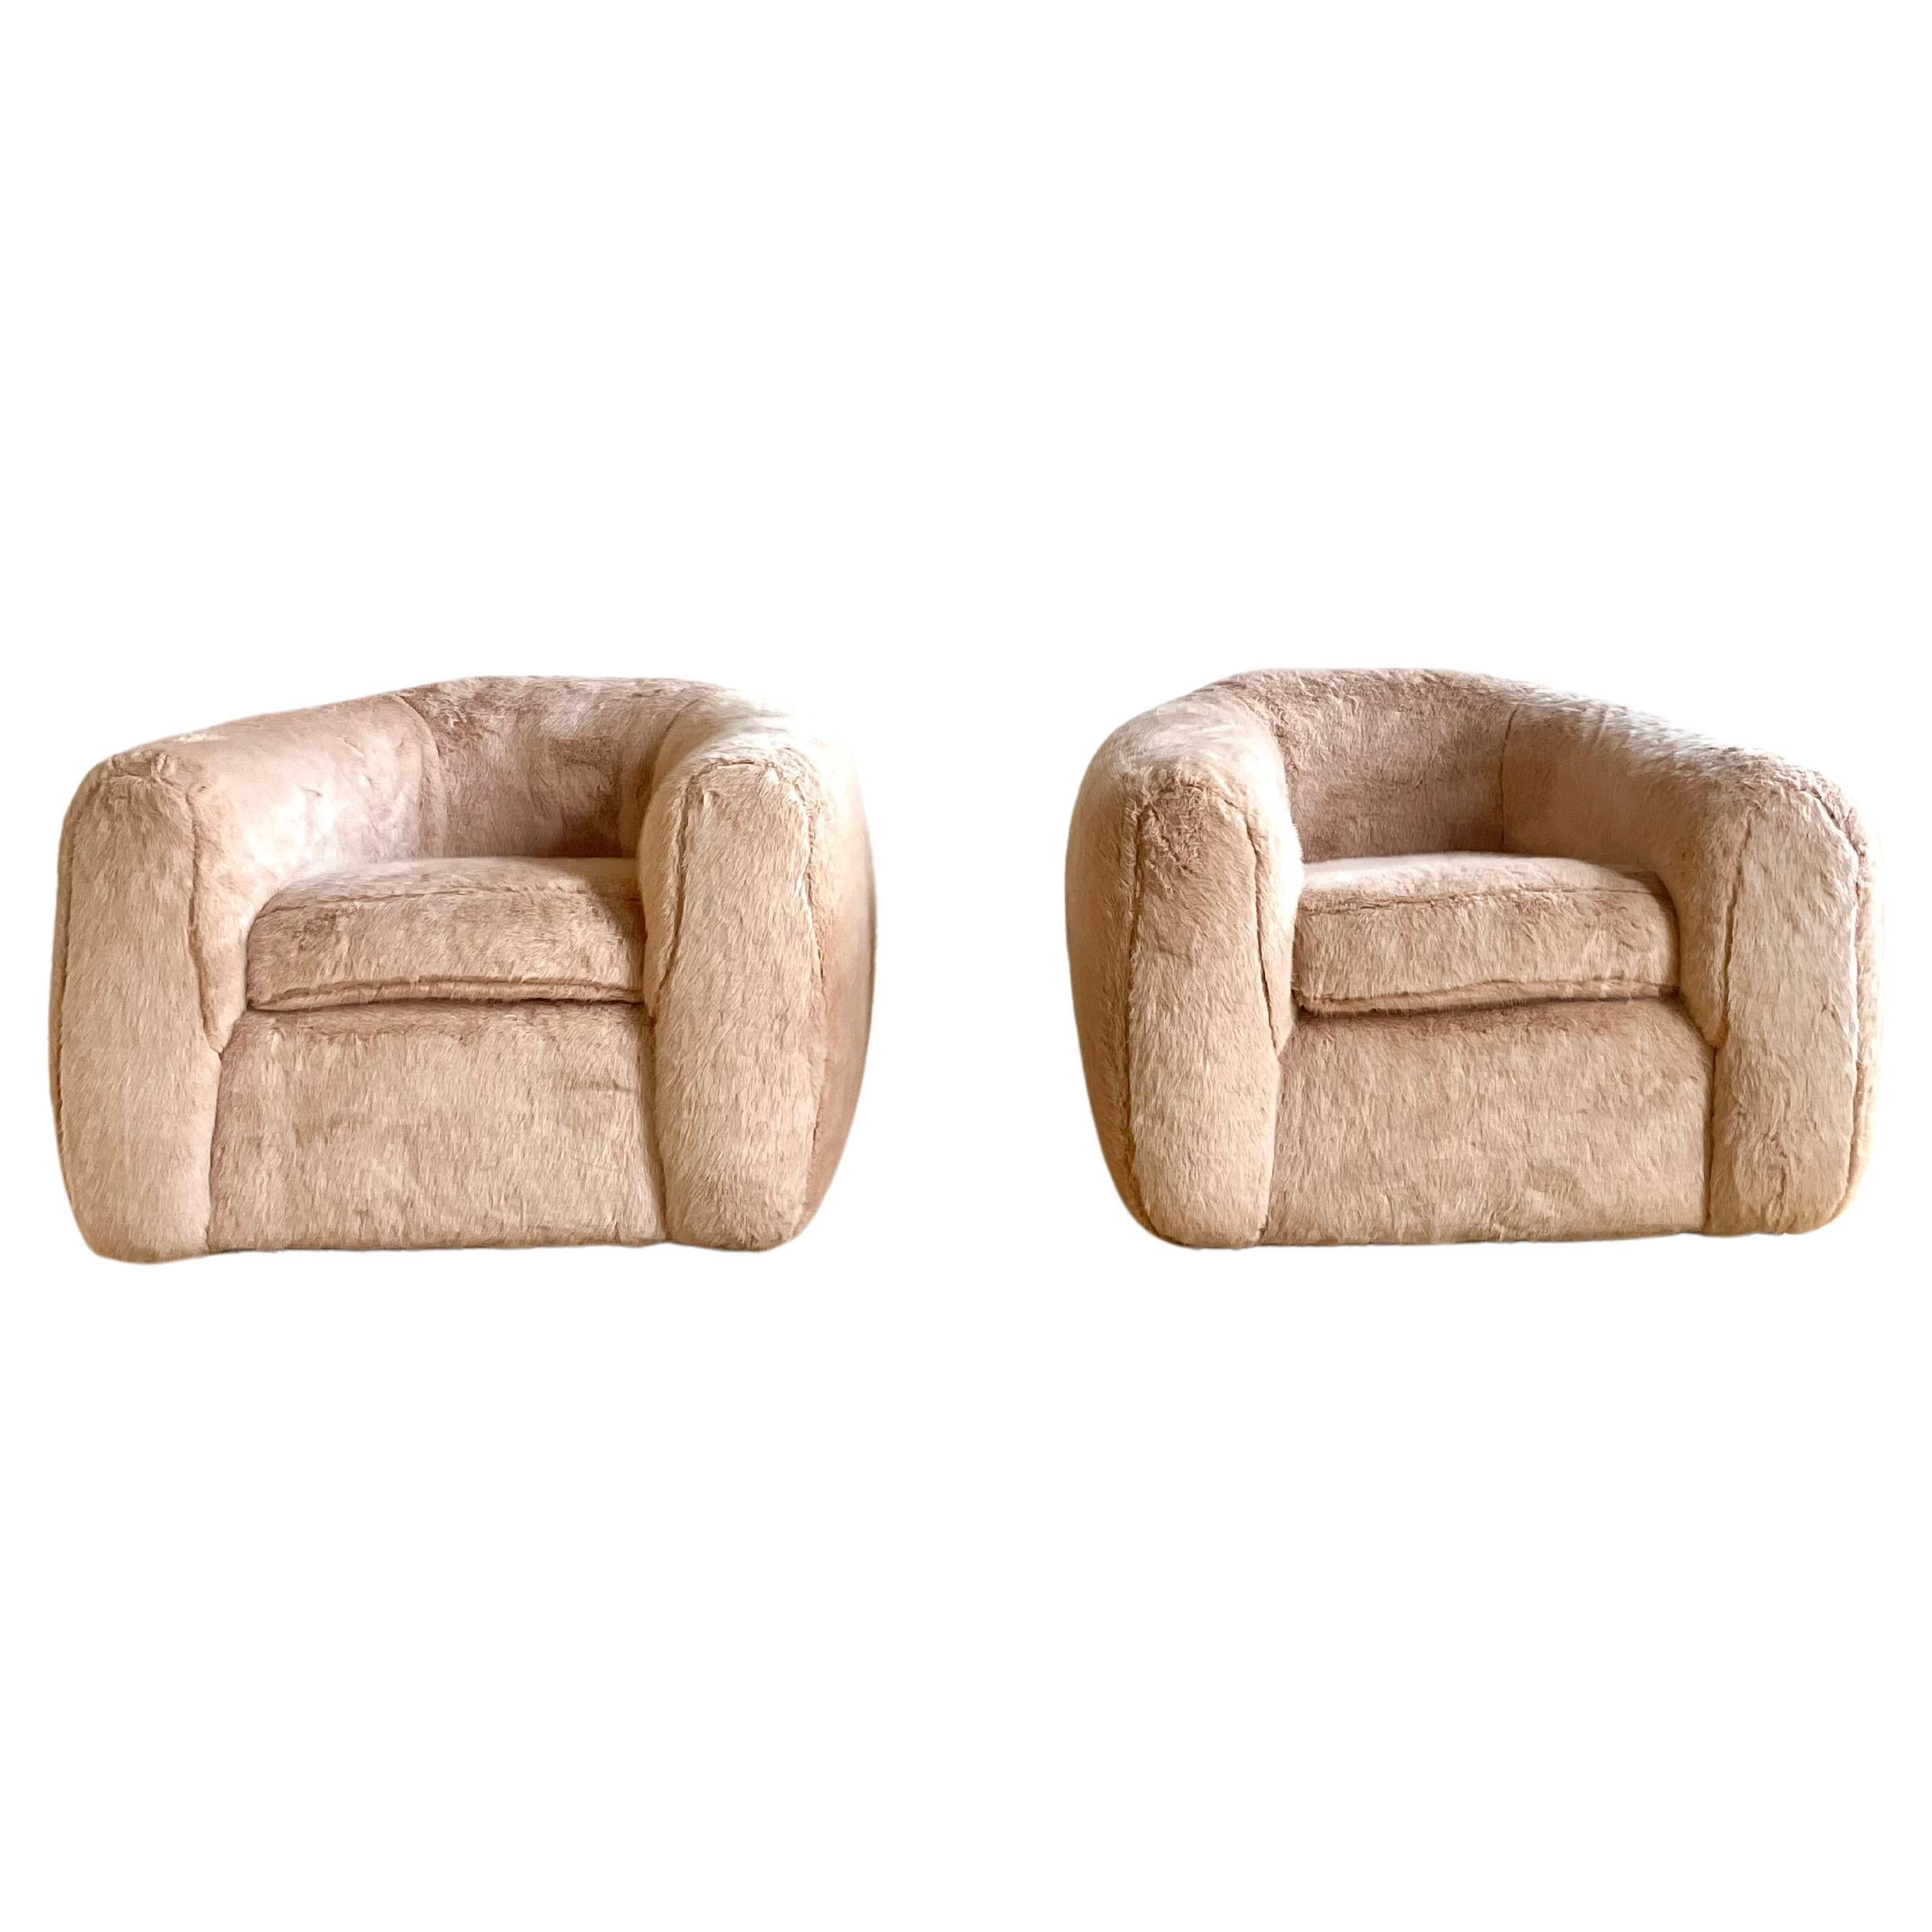 Absolutely stunning pair of Jean Royere style chairs in light pink faux fur.

The chairs are extremely comfortable with a unique profile hiding 4 wood legs. 

These chairs were custom made for a sophisticated Manhattan penthouse.

Chairs do not